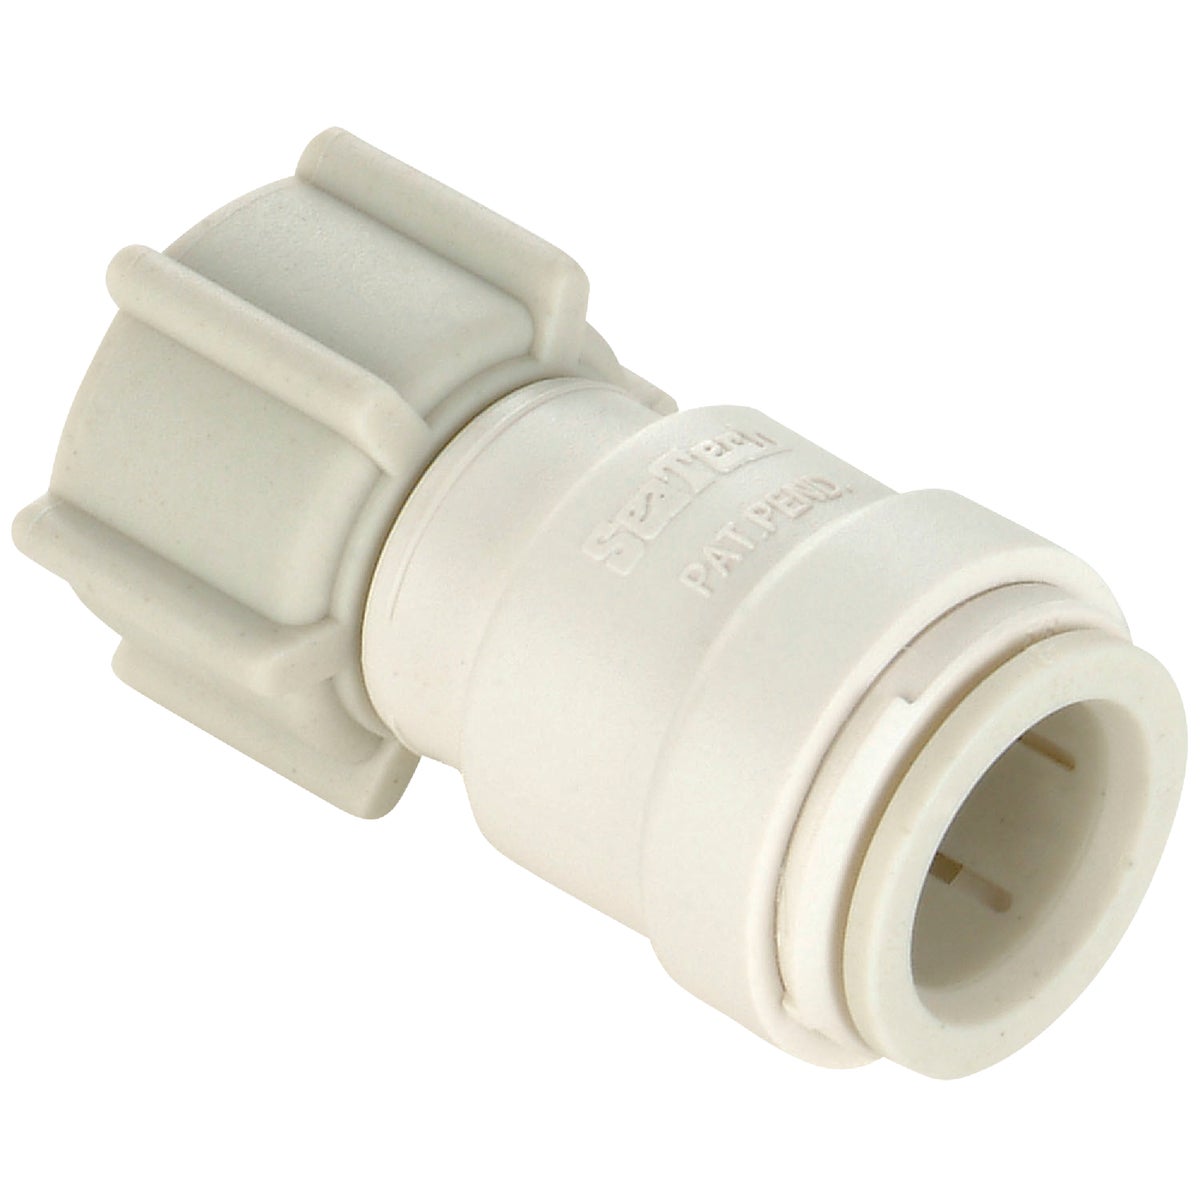 Watts Aqualock 1/2 In. CTS x 7/8 In. FPT Push-to-Connect Plastic Adapter